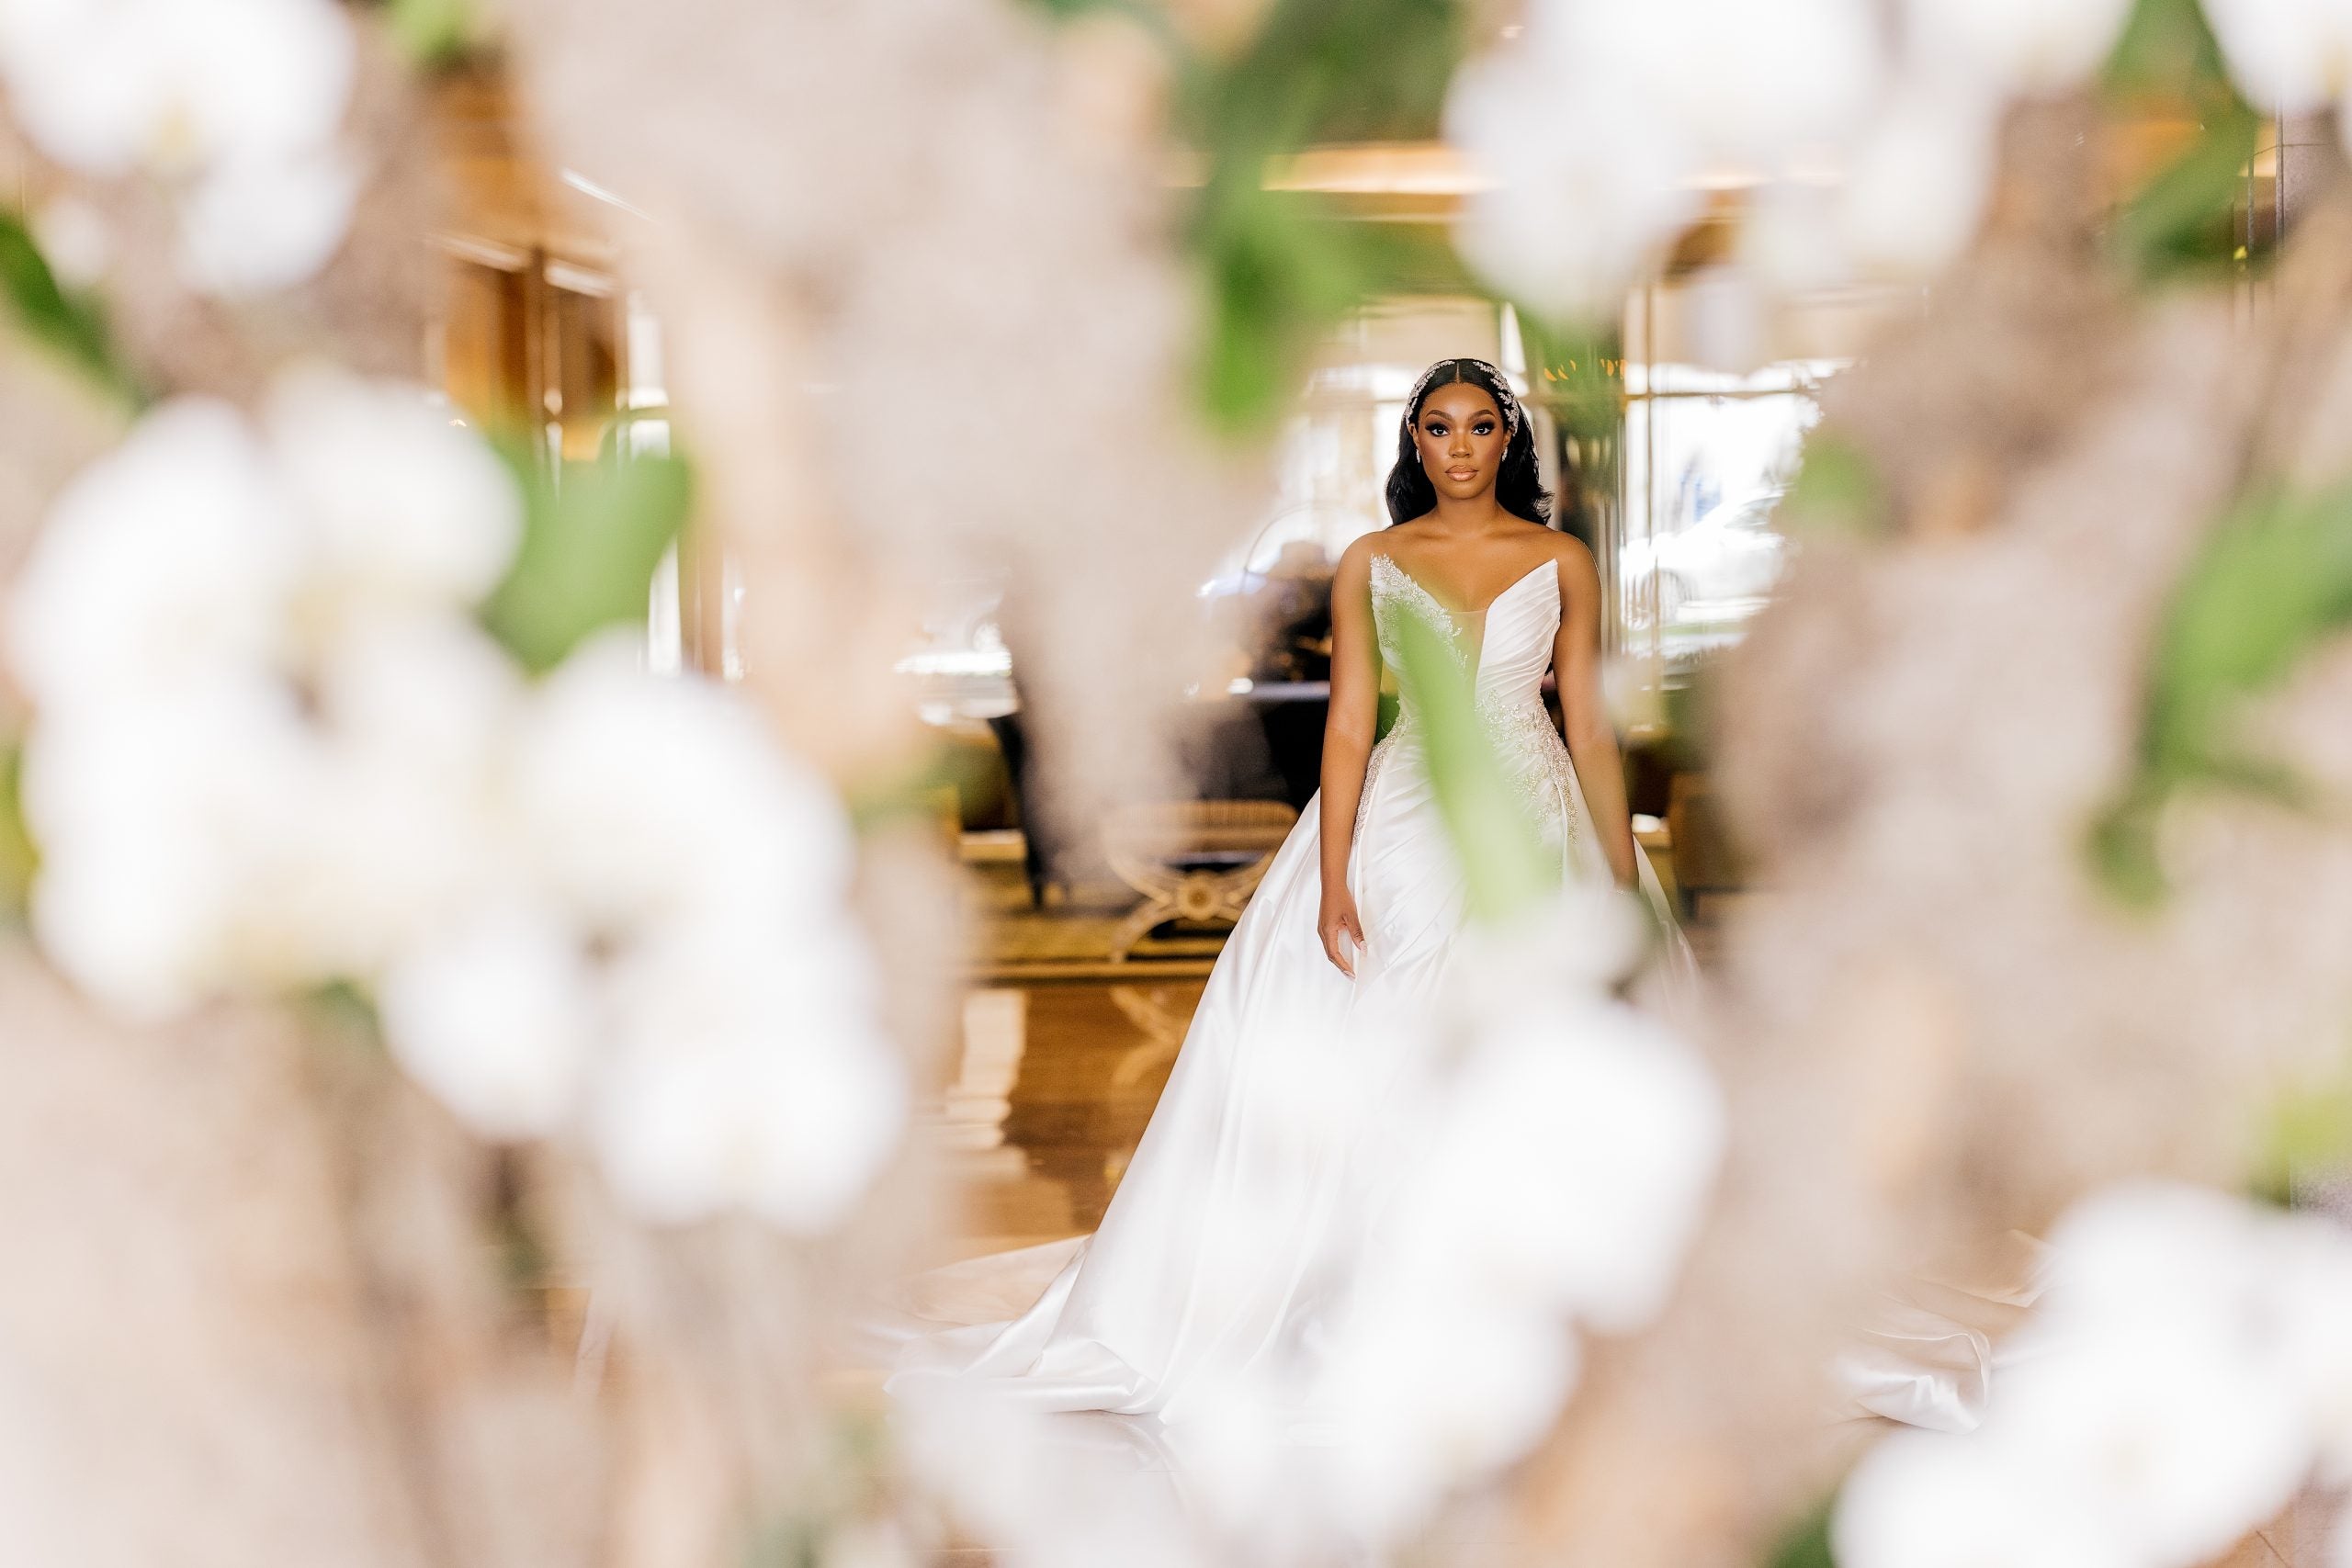 Bridal Bliss: Debbie And Chris Made Their Dream Destination Wedding A Stunning Reality In Portugal